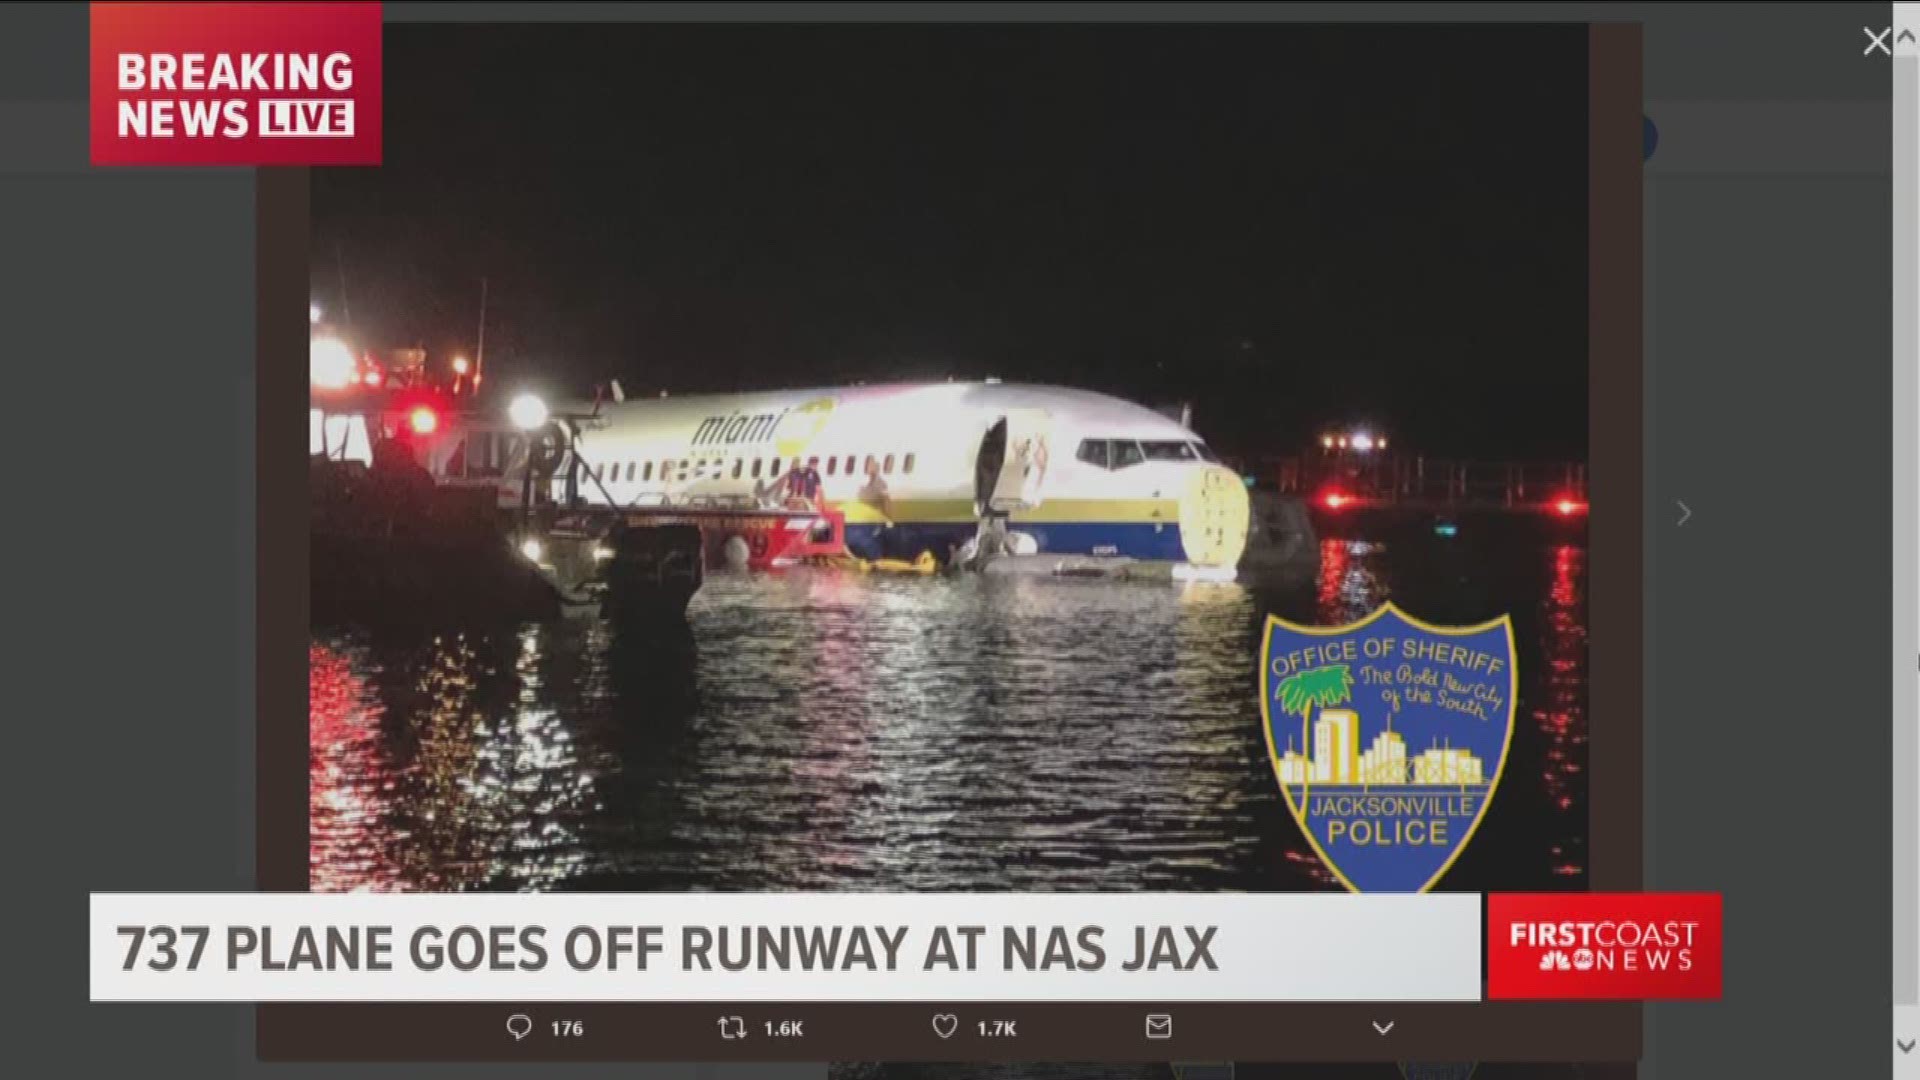 Miracle on the St. Johns: There were no fatalities Friday when a plane skidded off of the runway into the St. Johns River. The Boeing 737-800 passenger plane from Miami Air originated from Naval Station Guantanamo Bay, Cuba, with the destination being NAS Jax.